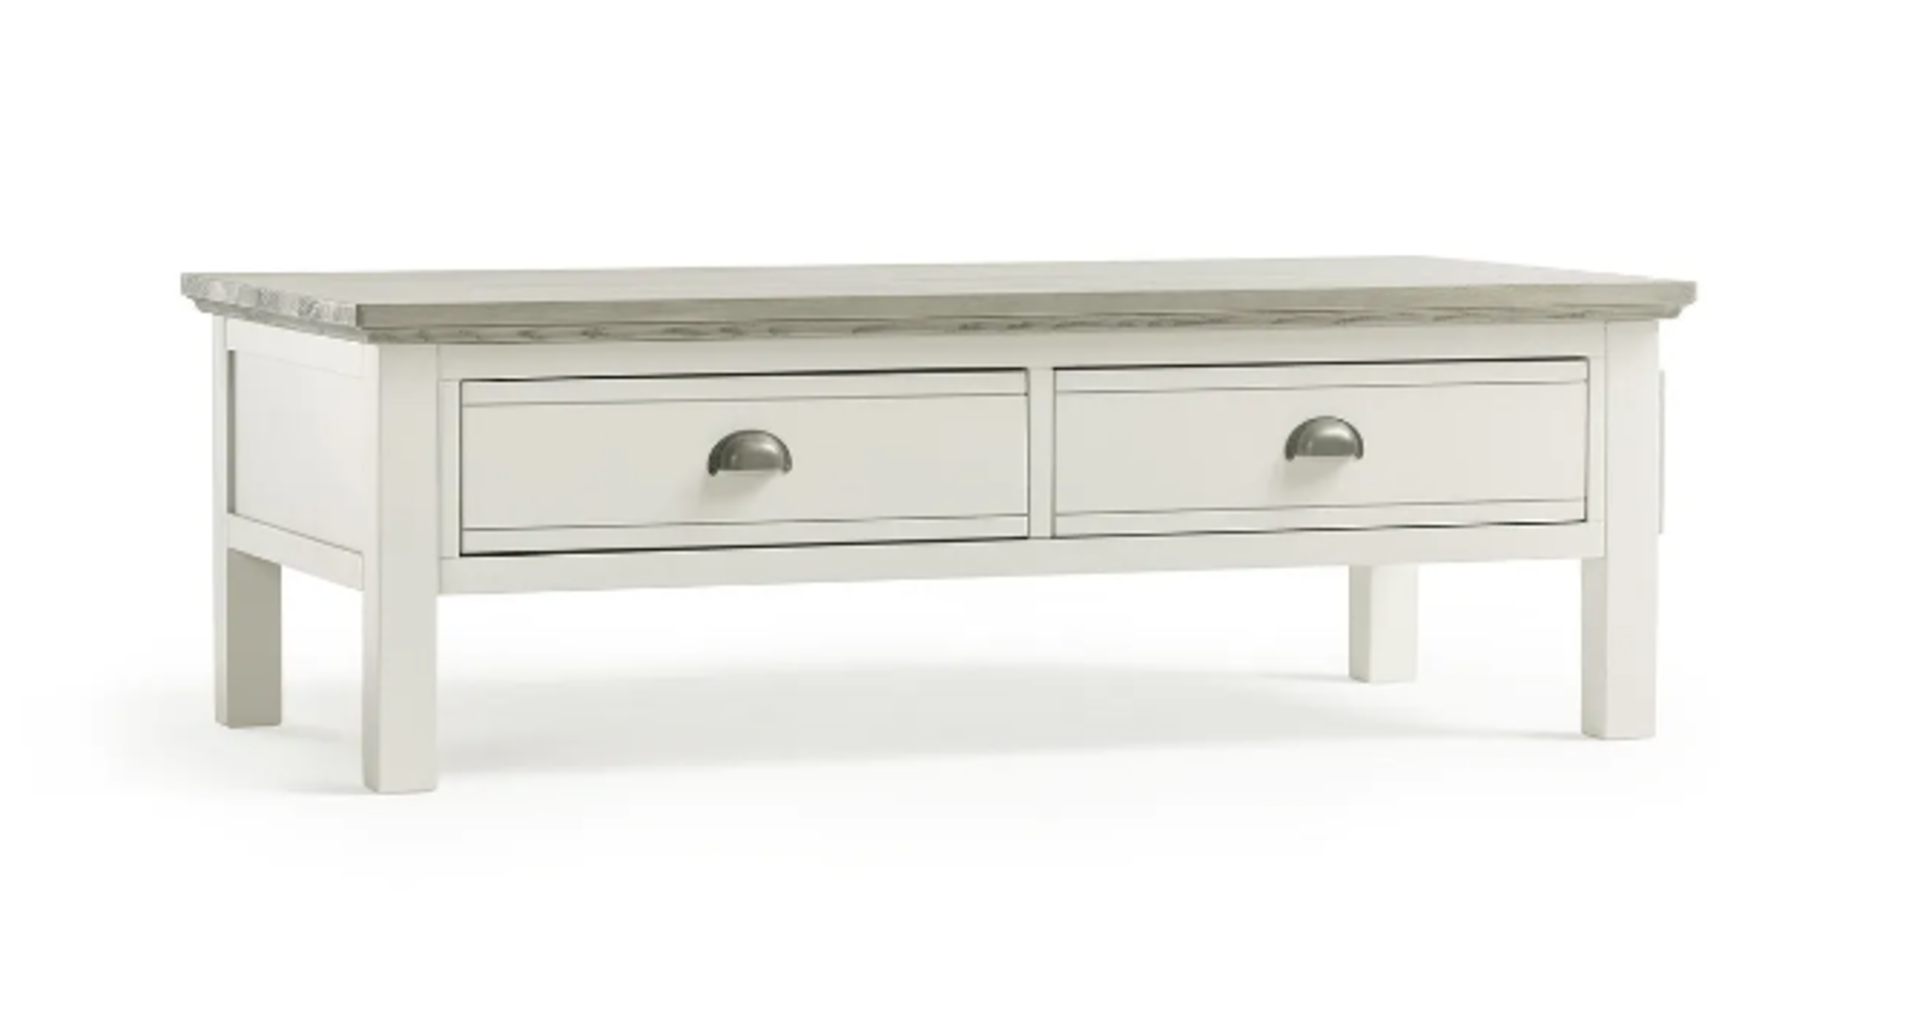 BROMPTON Painted Acacia and Ash Top 2 Drawer Coffee Table. RRP £439.99. The Brompton coffee table